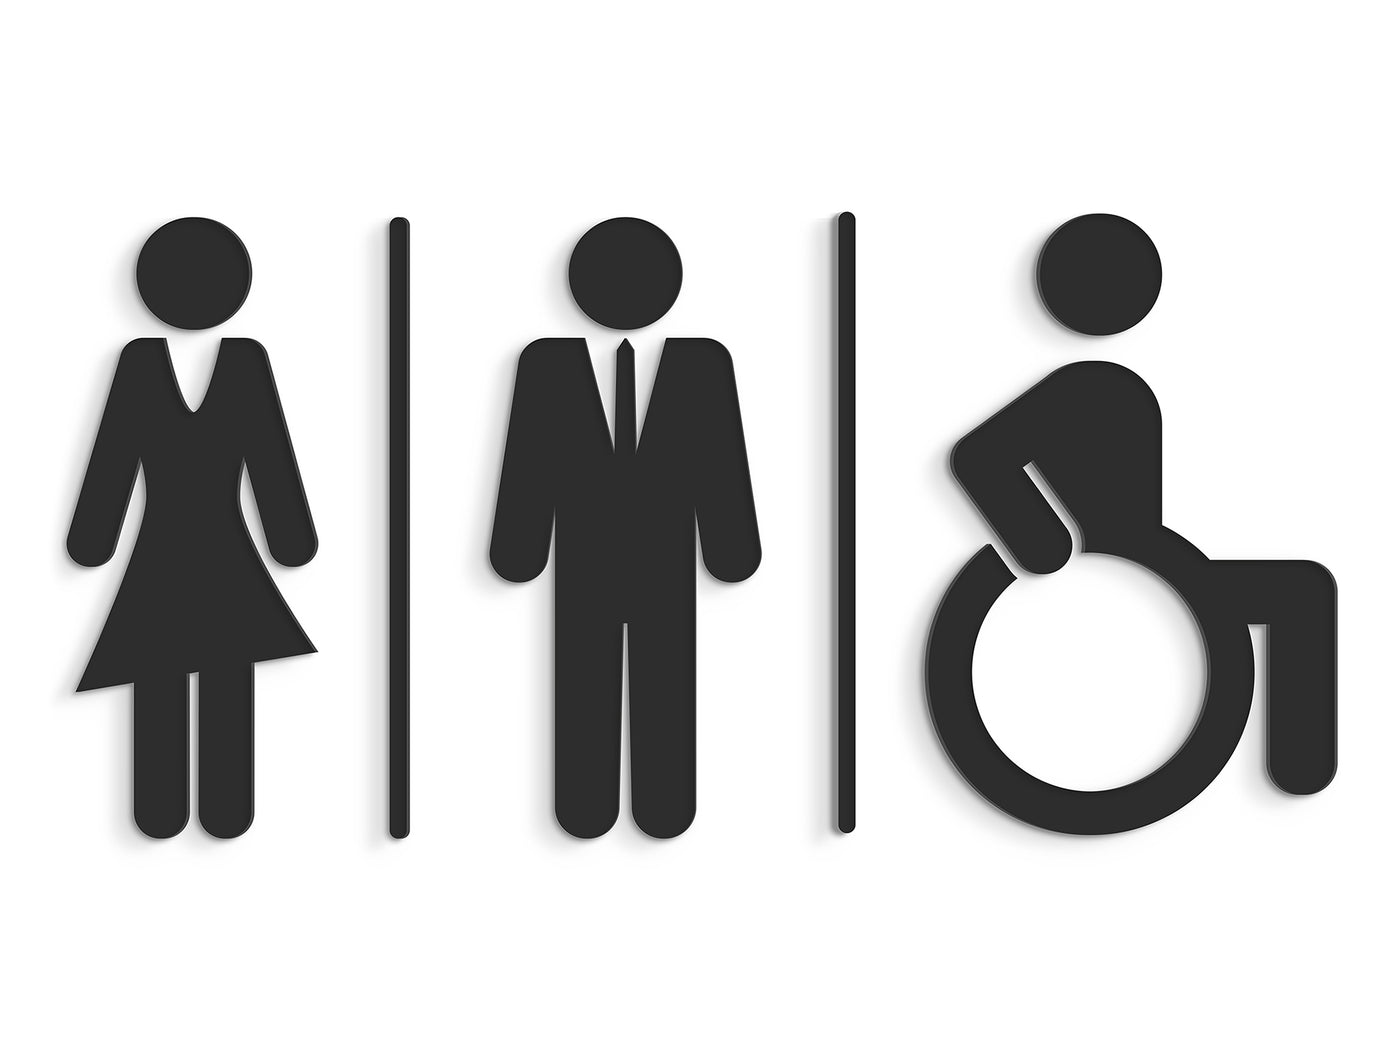 Dandy, Set 3x - Embossed Adhesive Symbols, Signage for Toilets -  Man, Woman, Disabled restroom